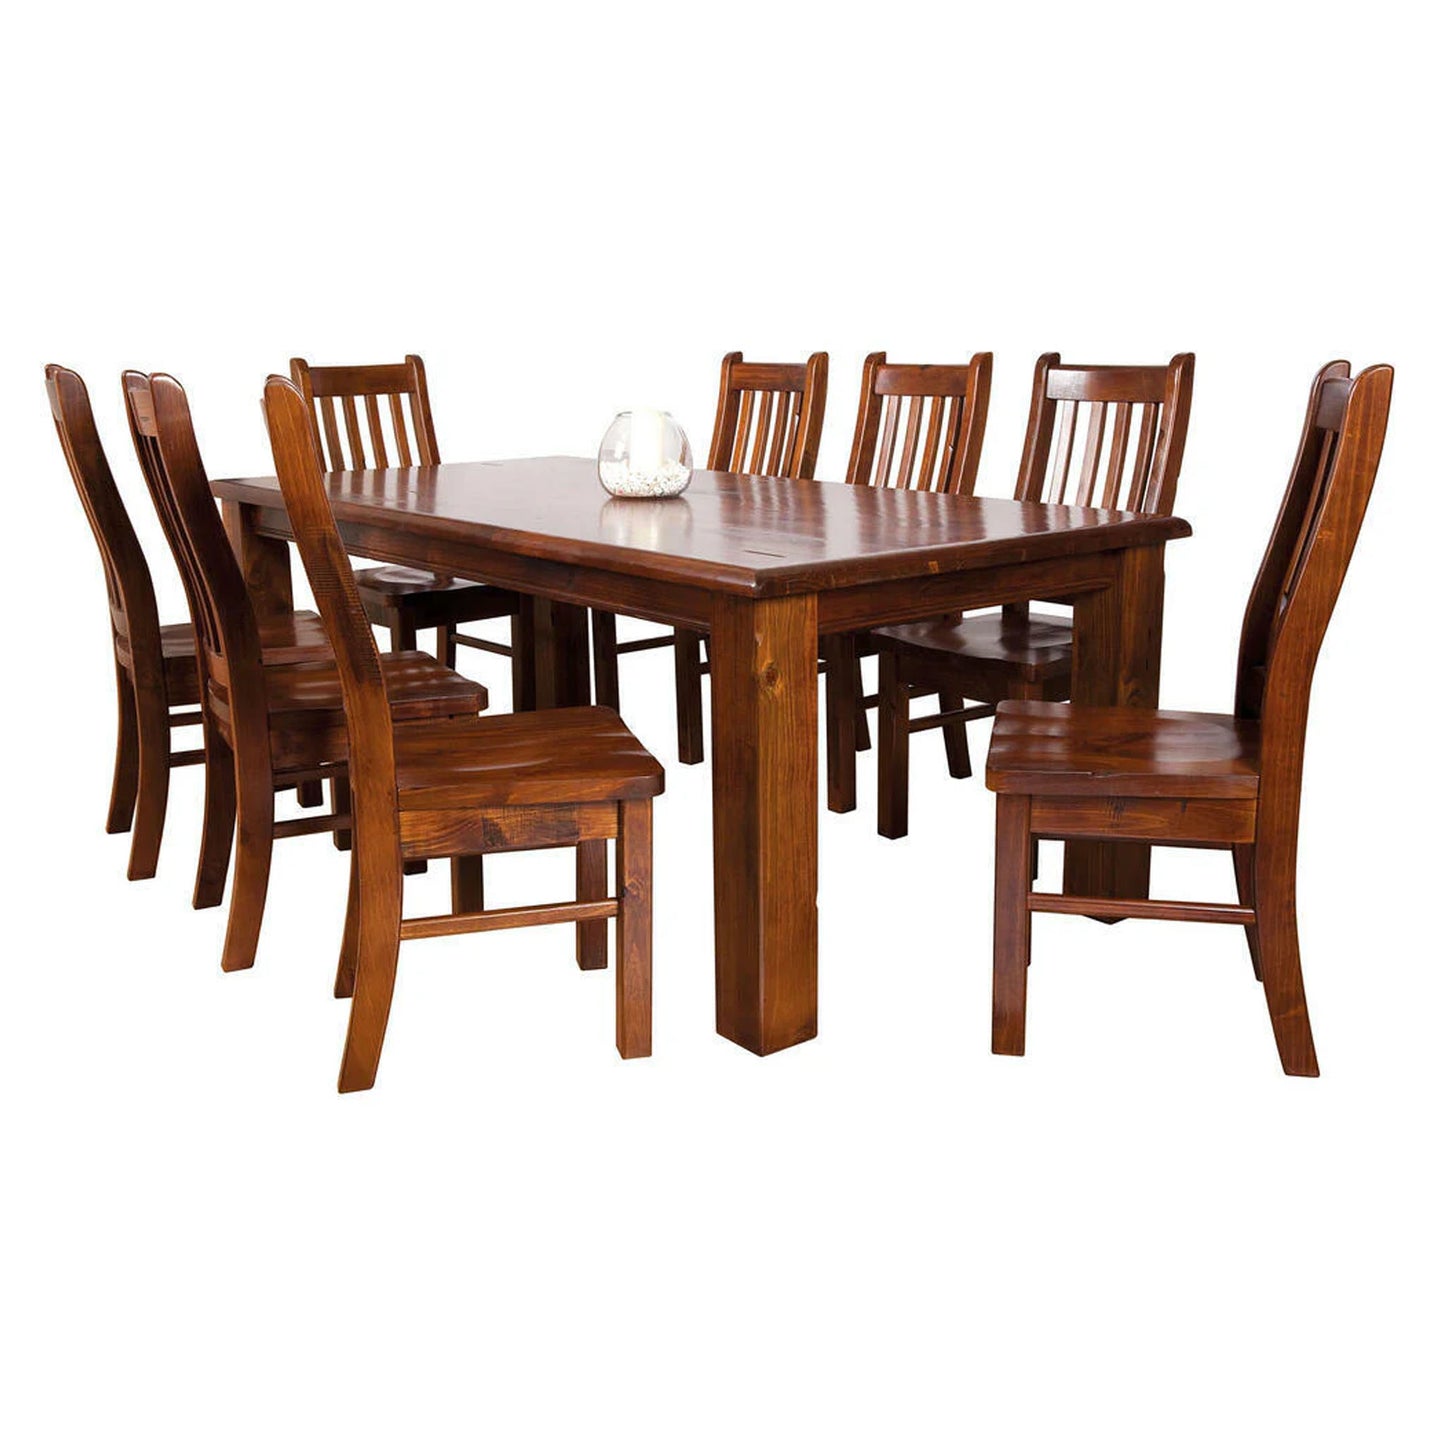 Avery Dining Suite - John Young Furniture